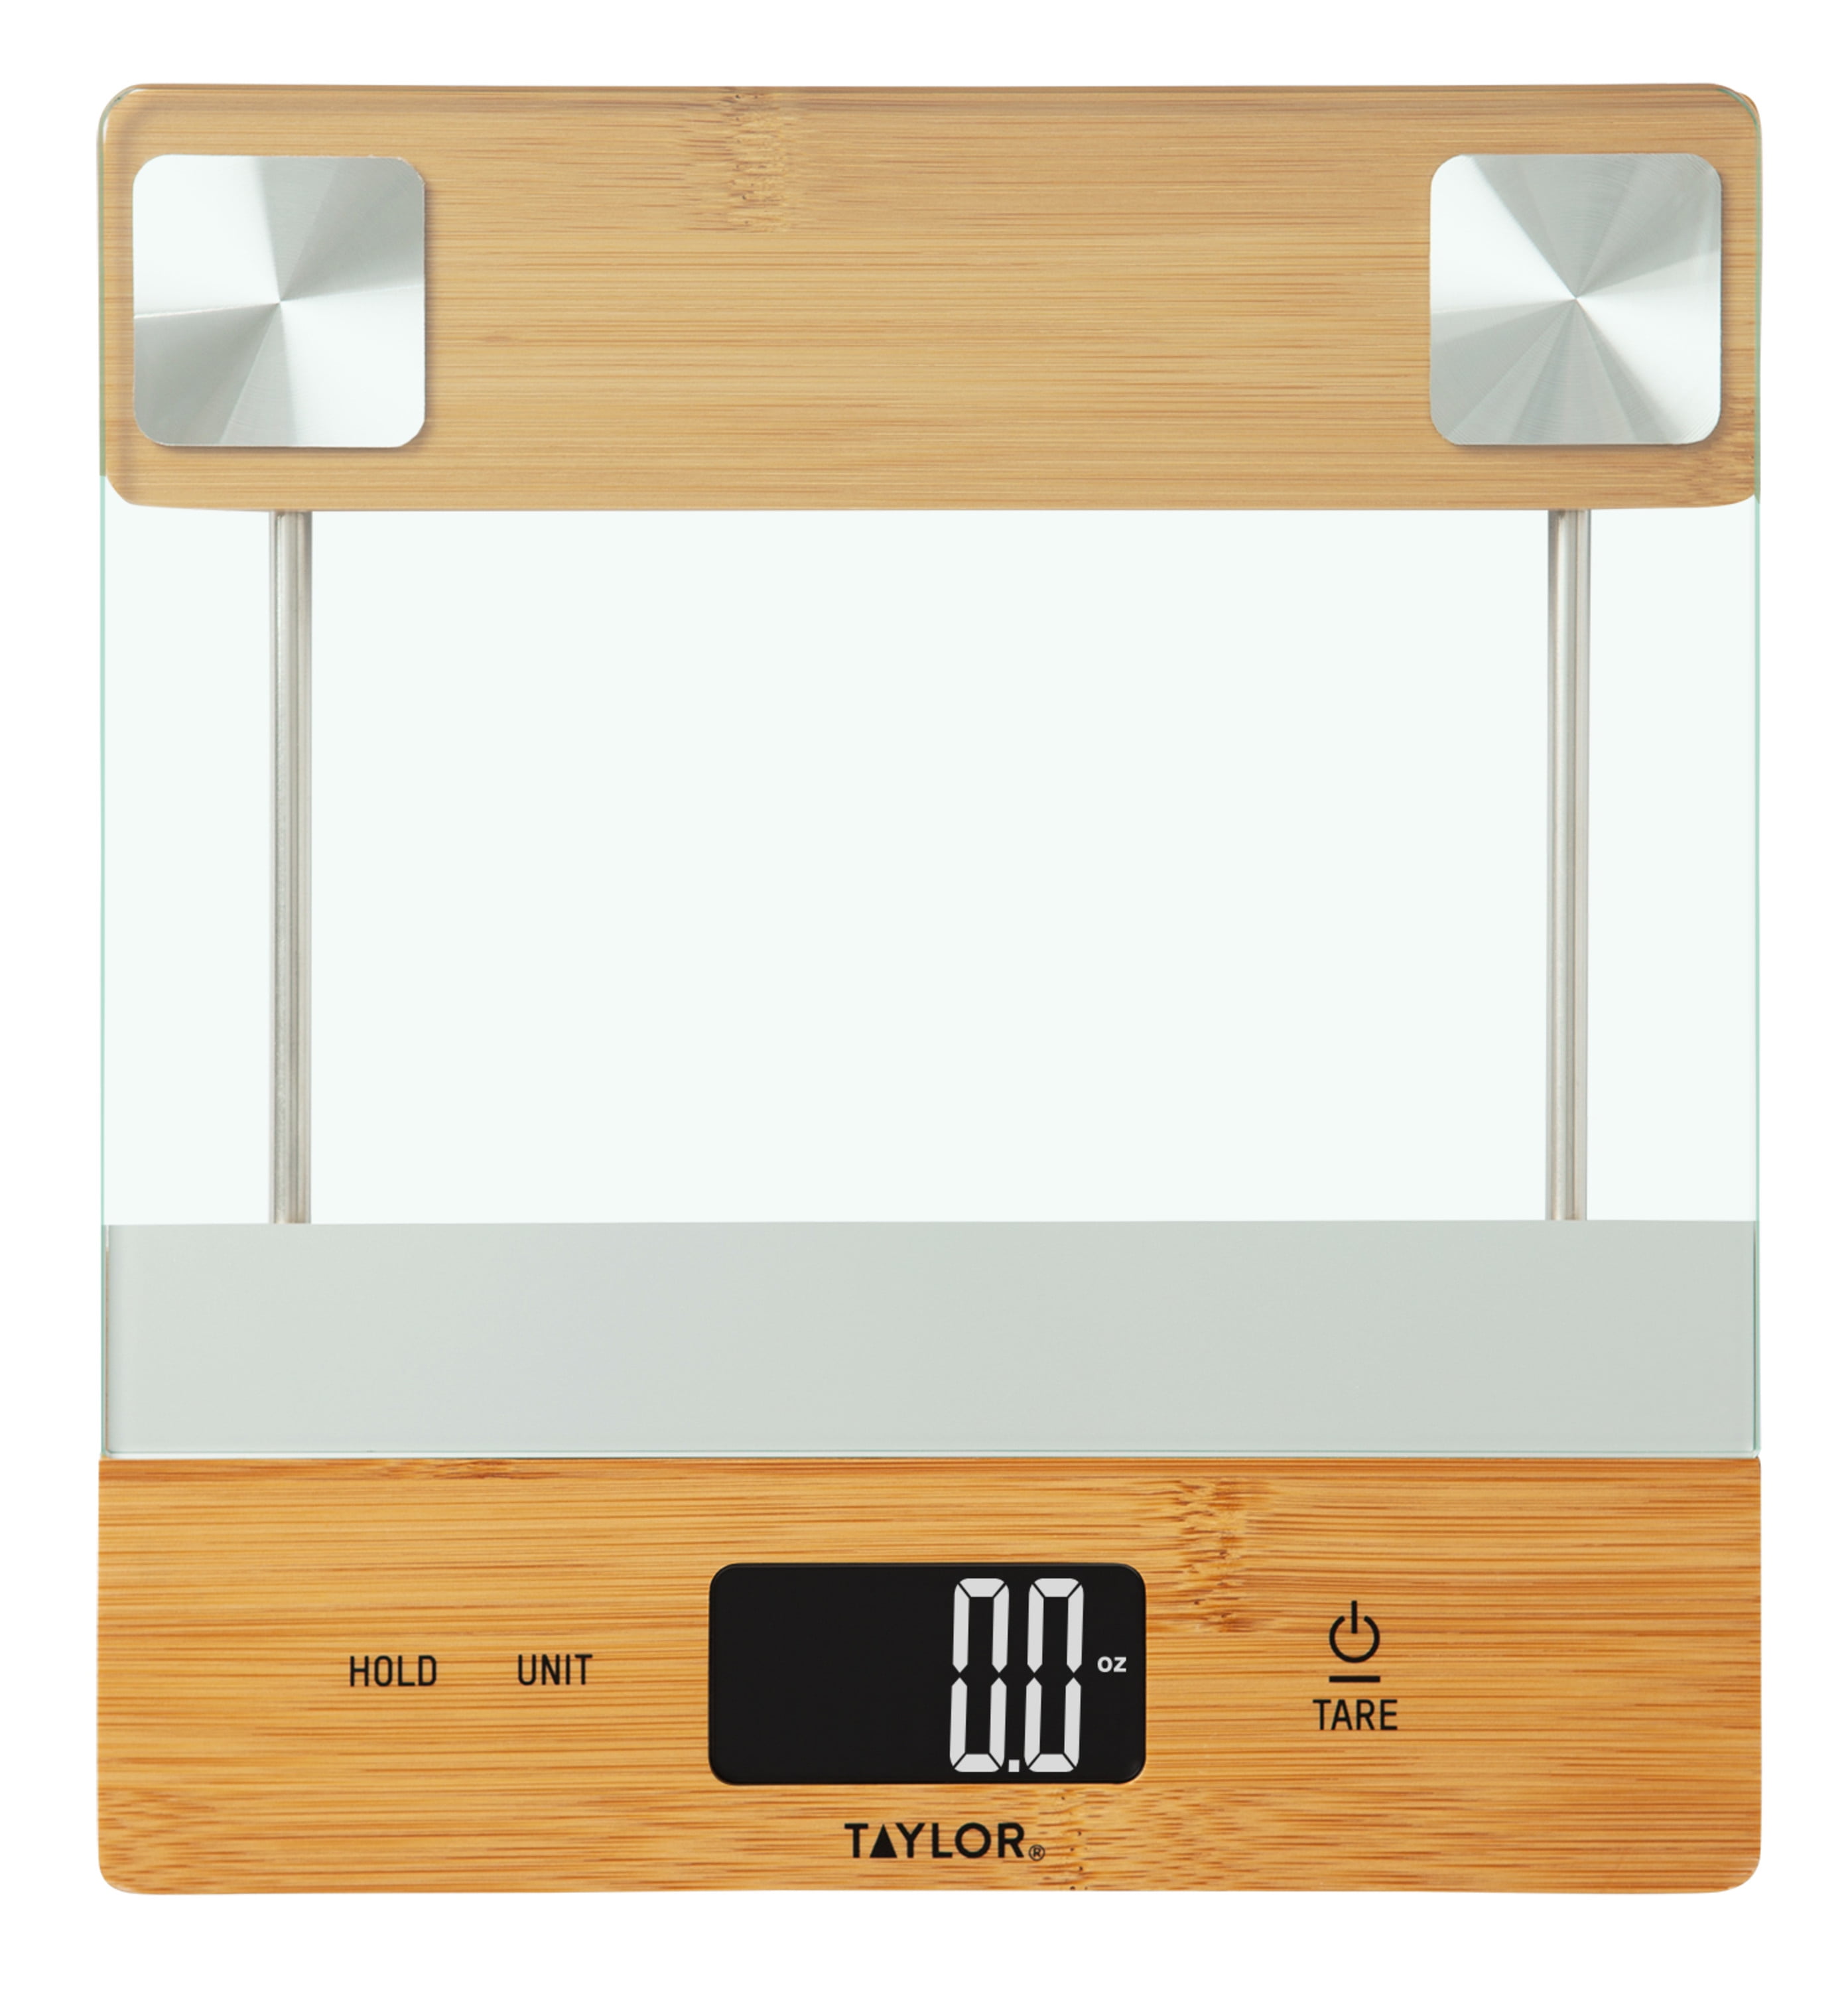 ROOTS & HARVEST Digital Food Scale 11 lb 1665 - The Home Depot